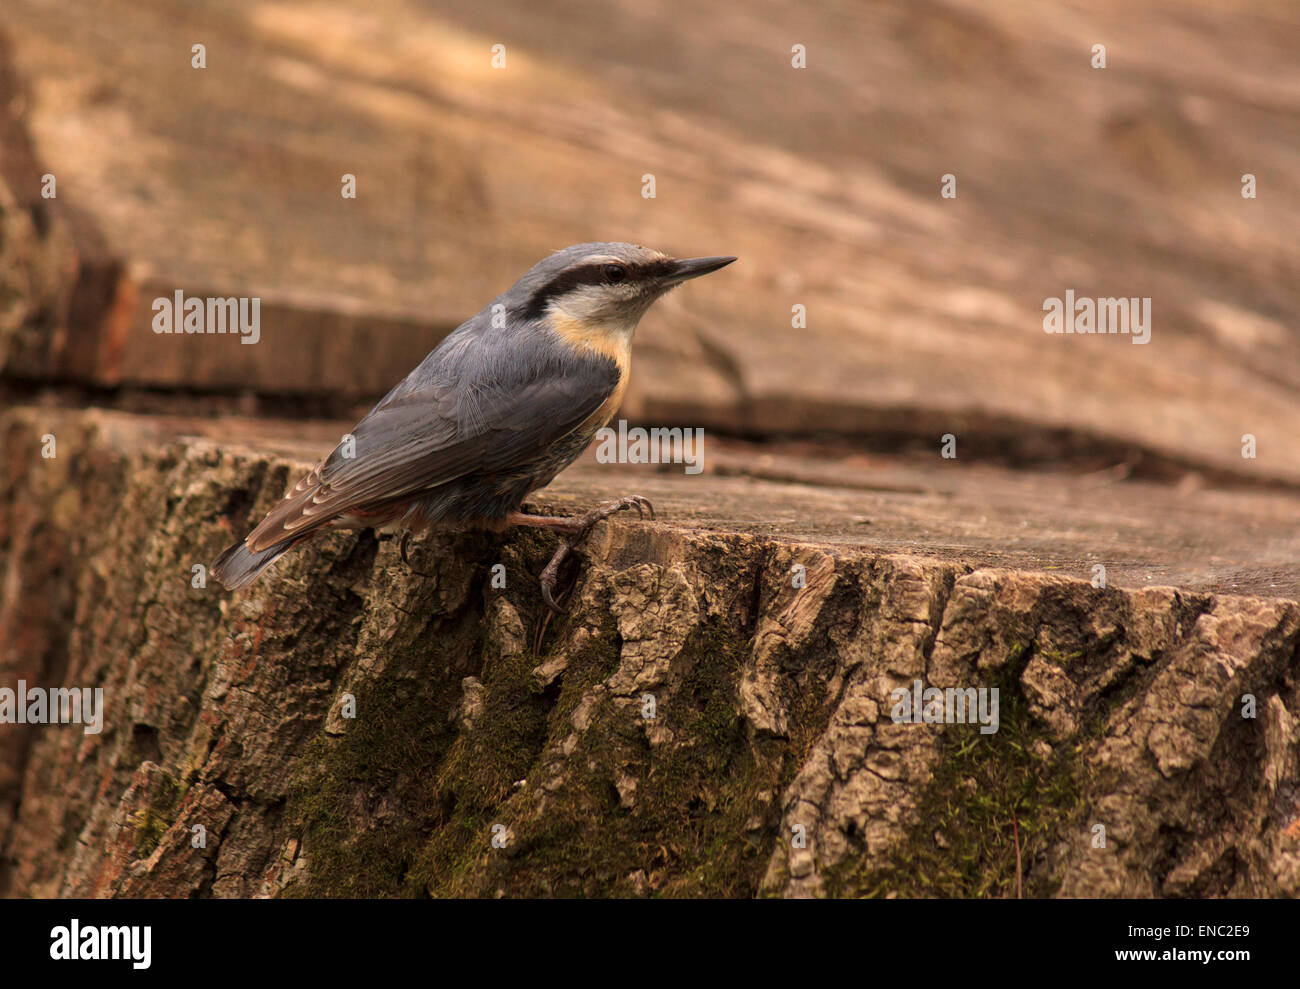 close up of nuthatch sitting on stump of tree Stock Photo